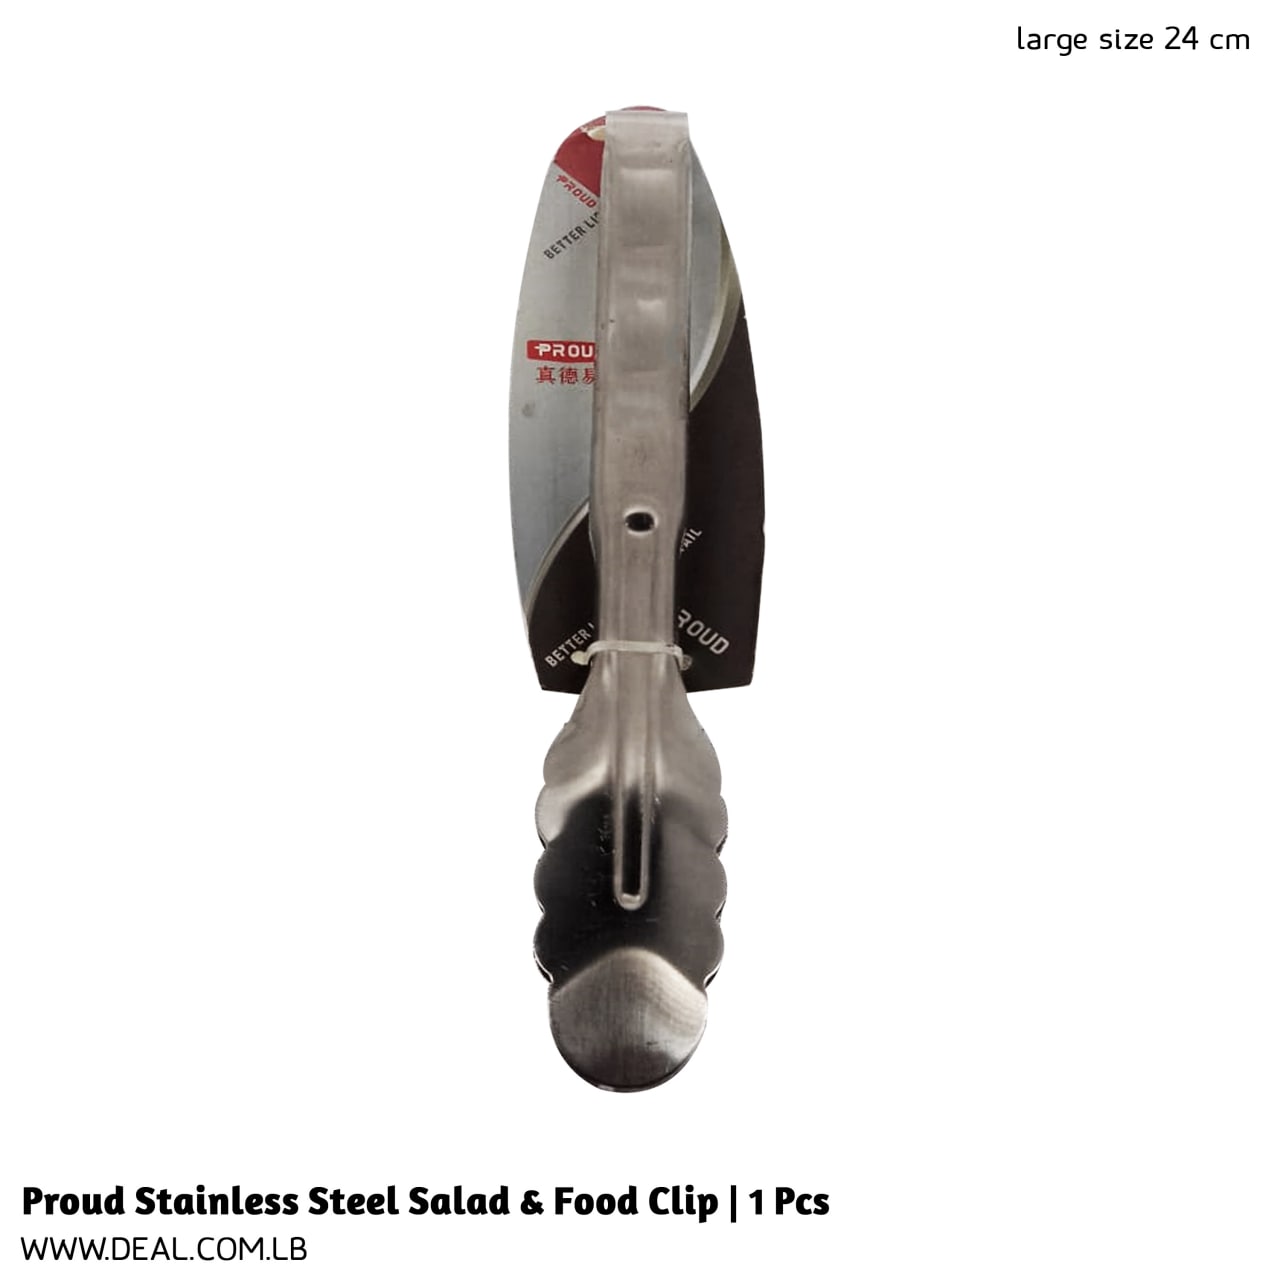 Proud Stainless Steel Salad & Food Clip | 1 Pcs